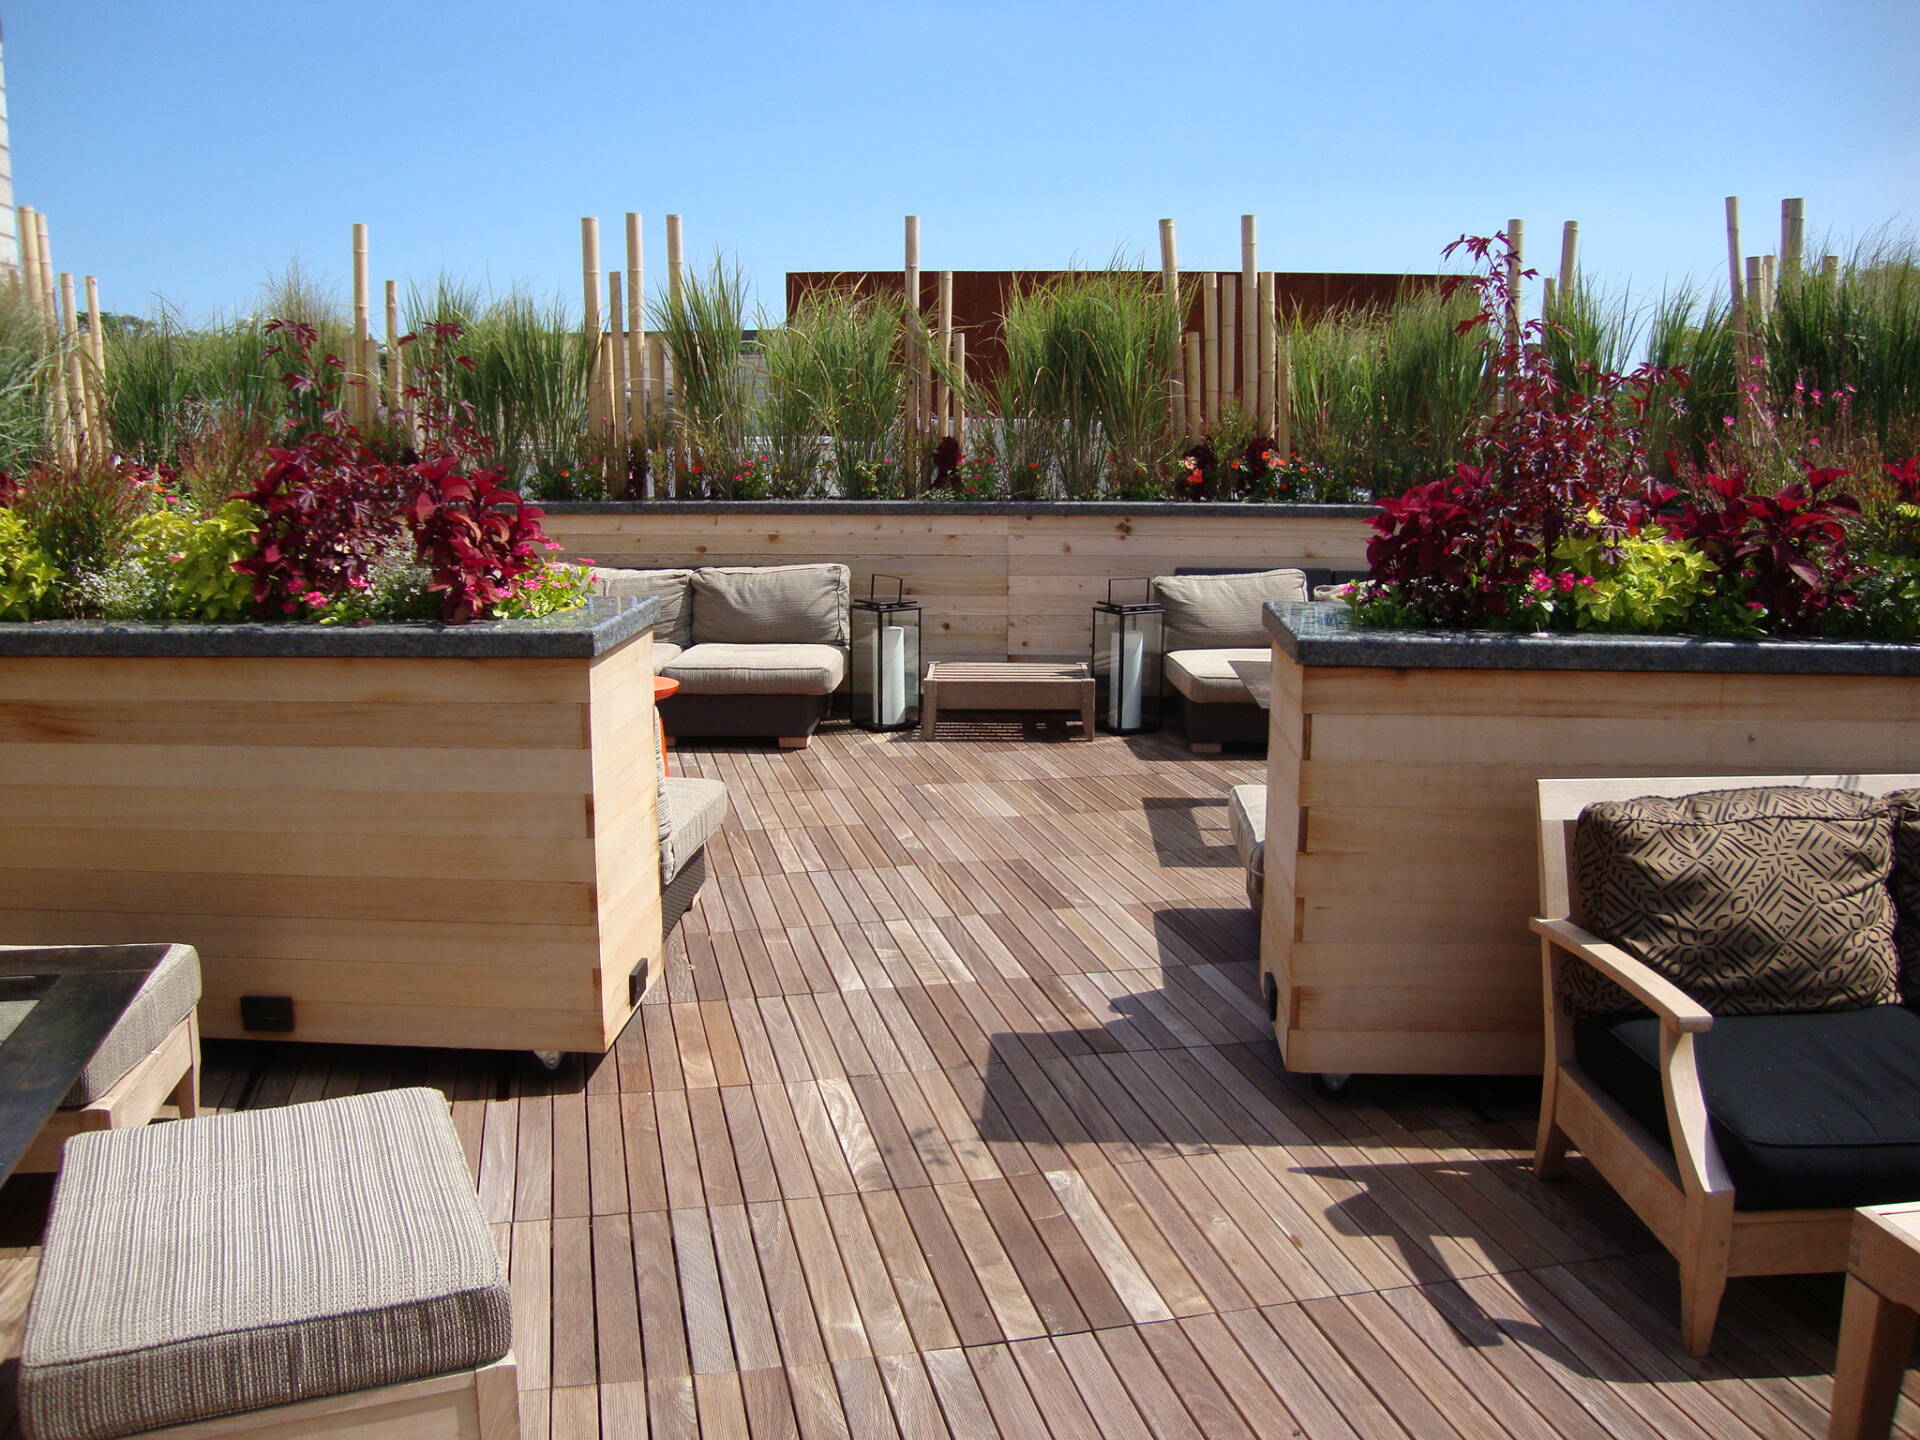 Sunny Rooftop Deck with Plants